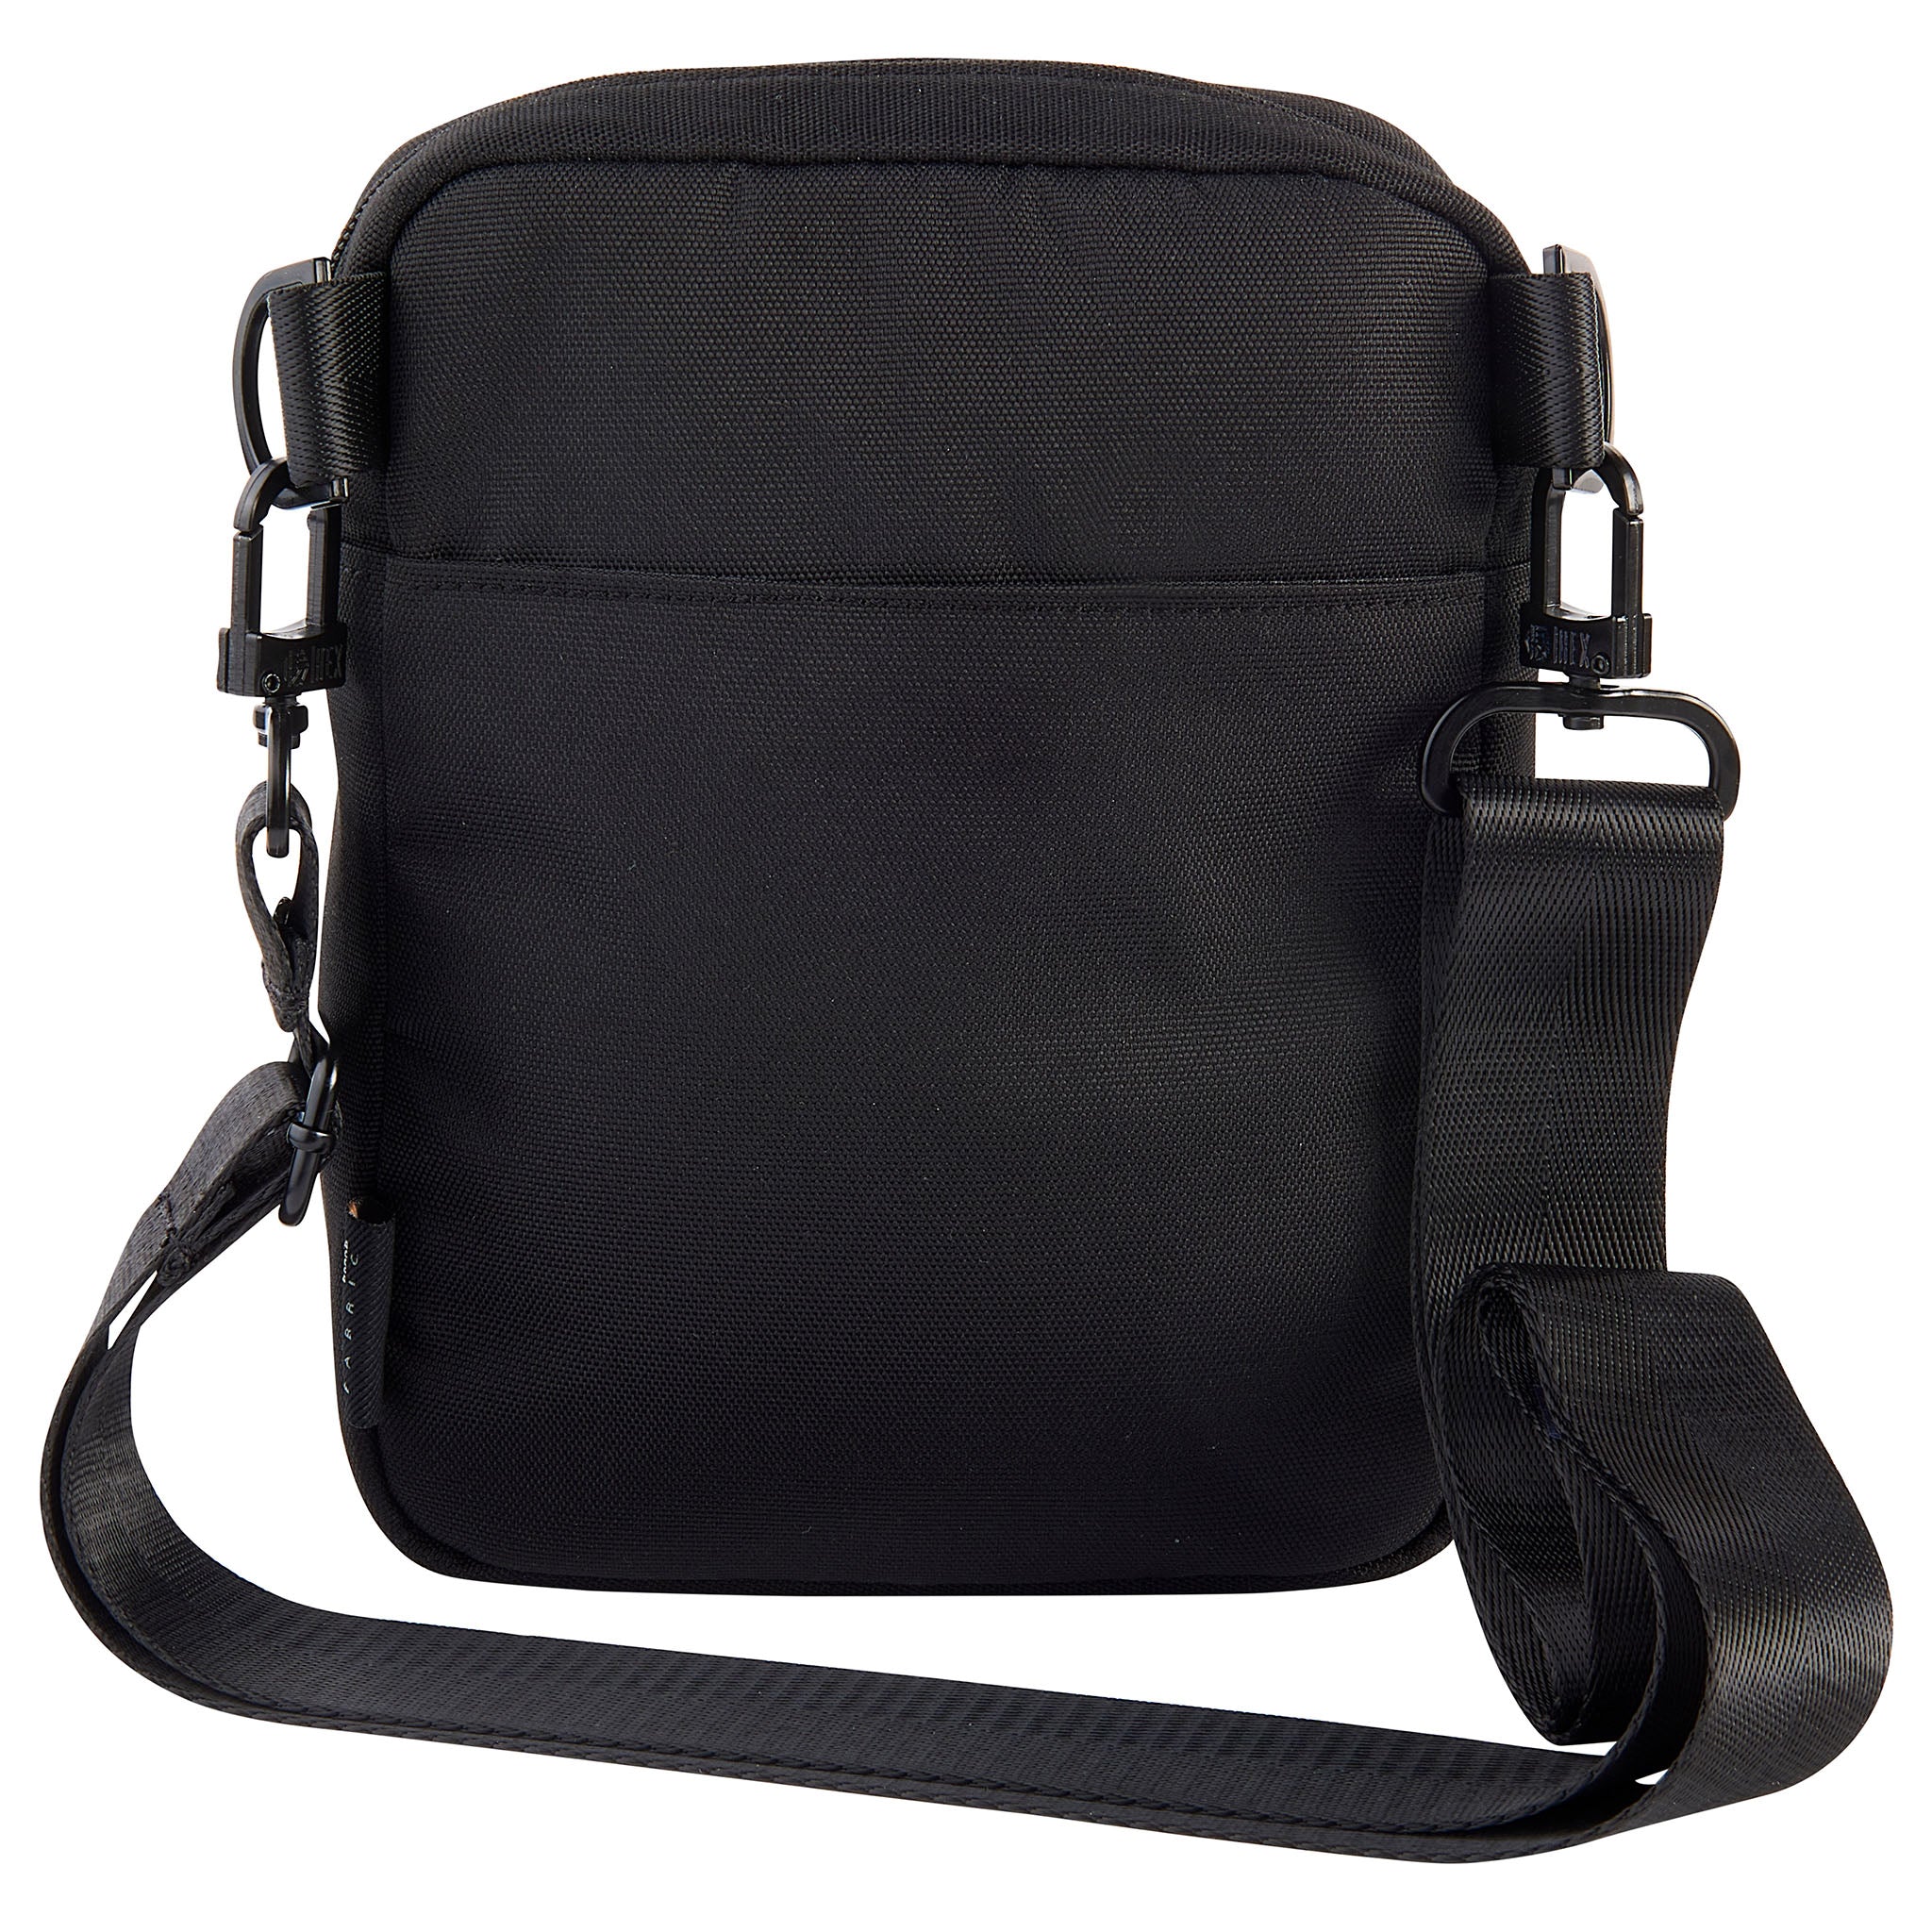 Mini printed artificial leather cross body chest bag for men and